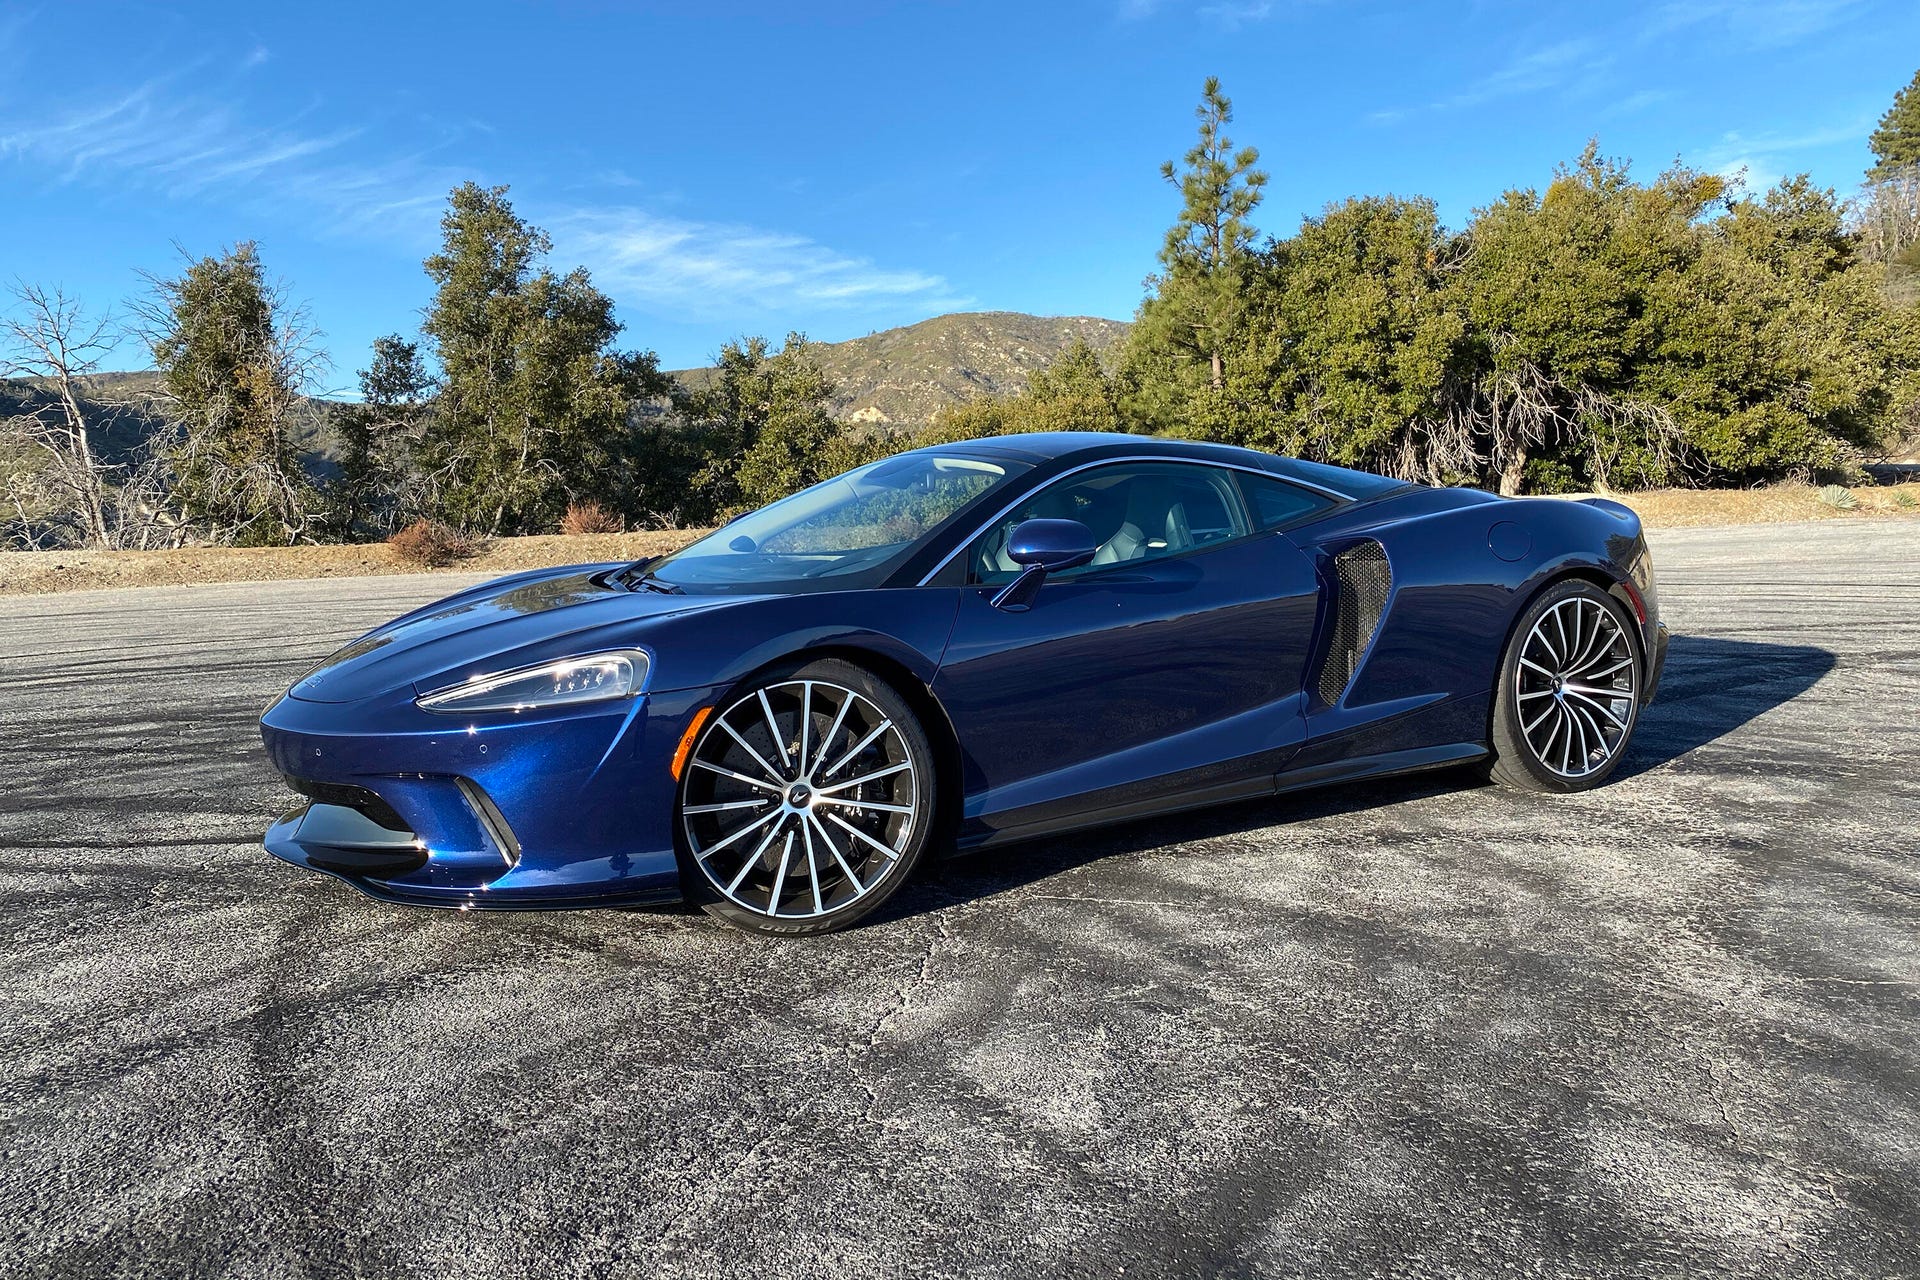 2020 McLaren GT review: What's in a name? - CNET